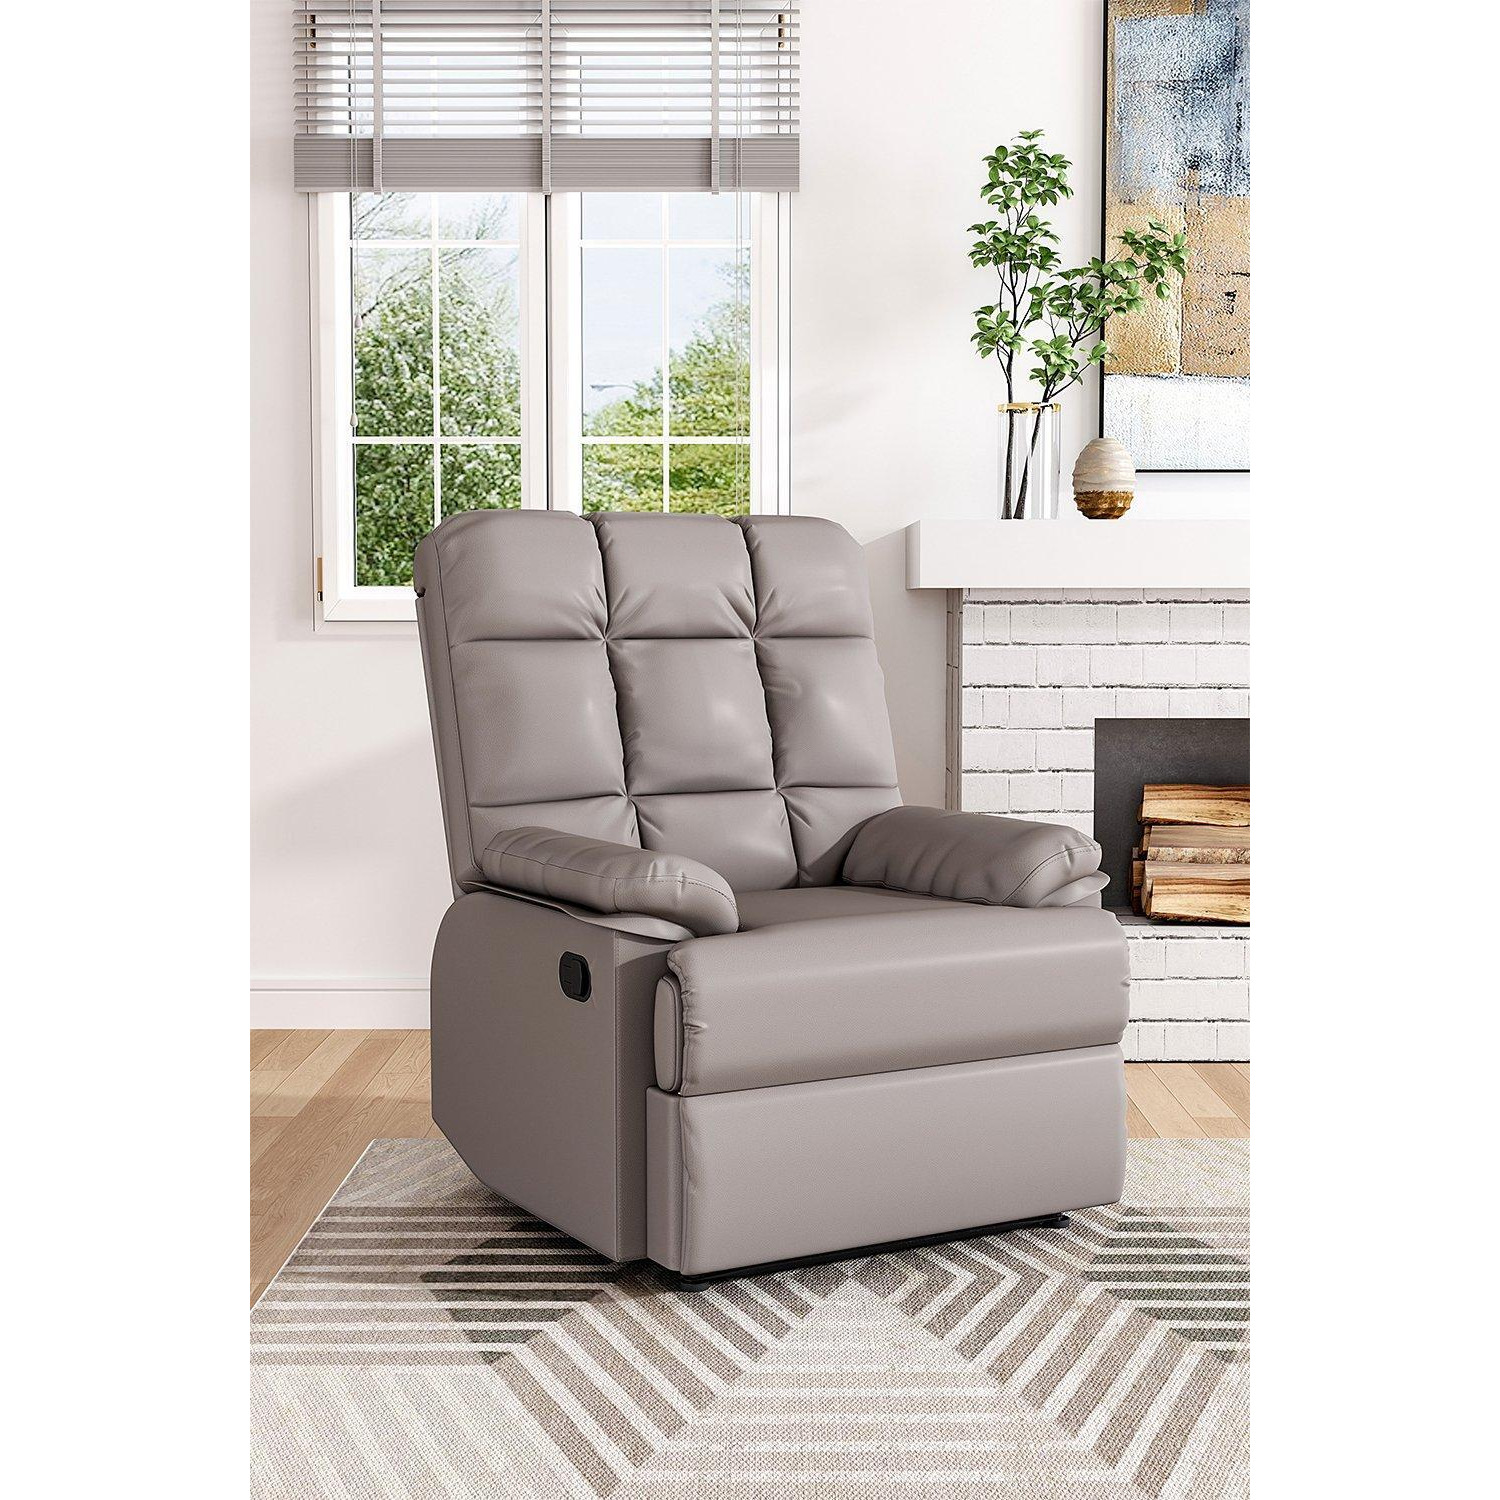 Khaki Checkered Faux Leather Upholstered Recliner Armchair - image 1